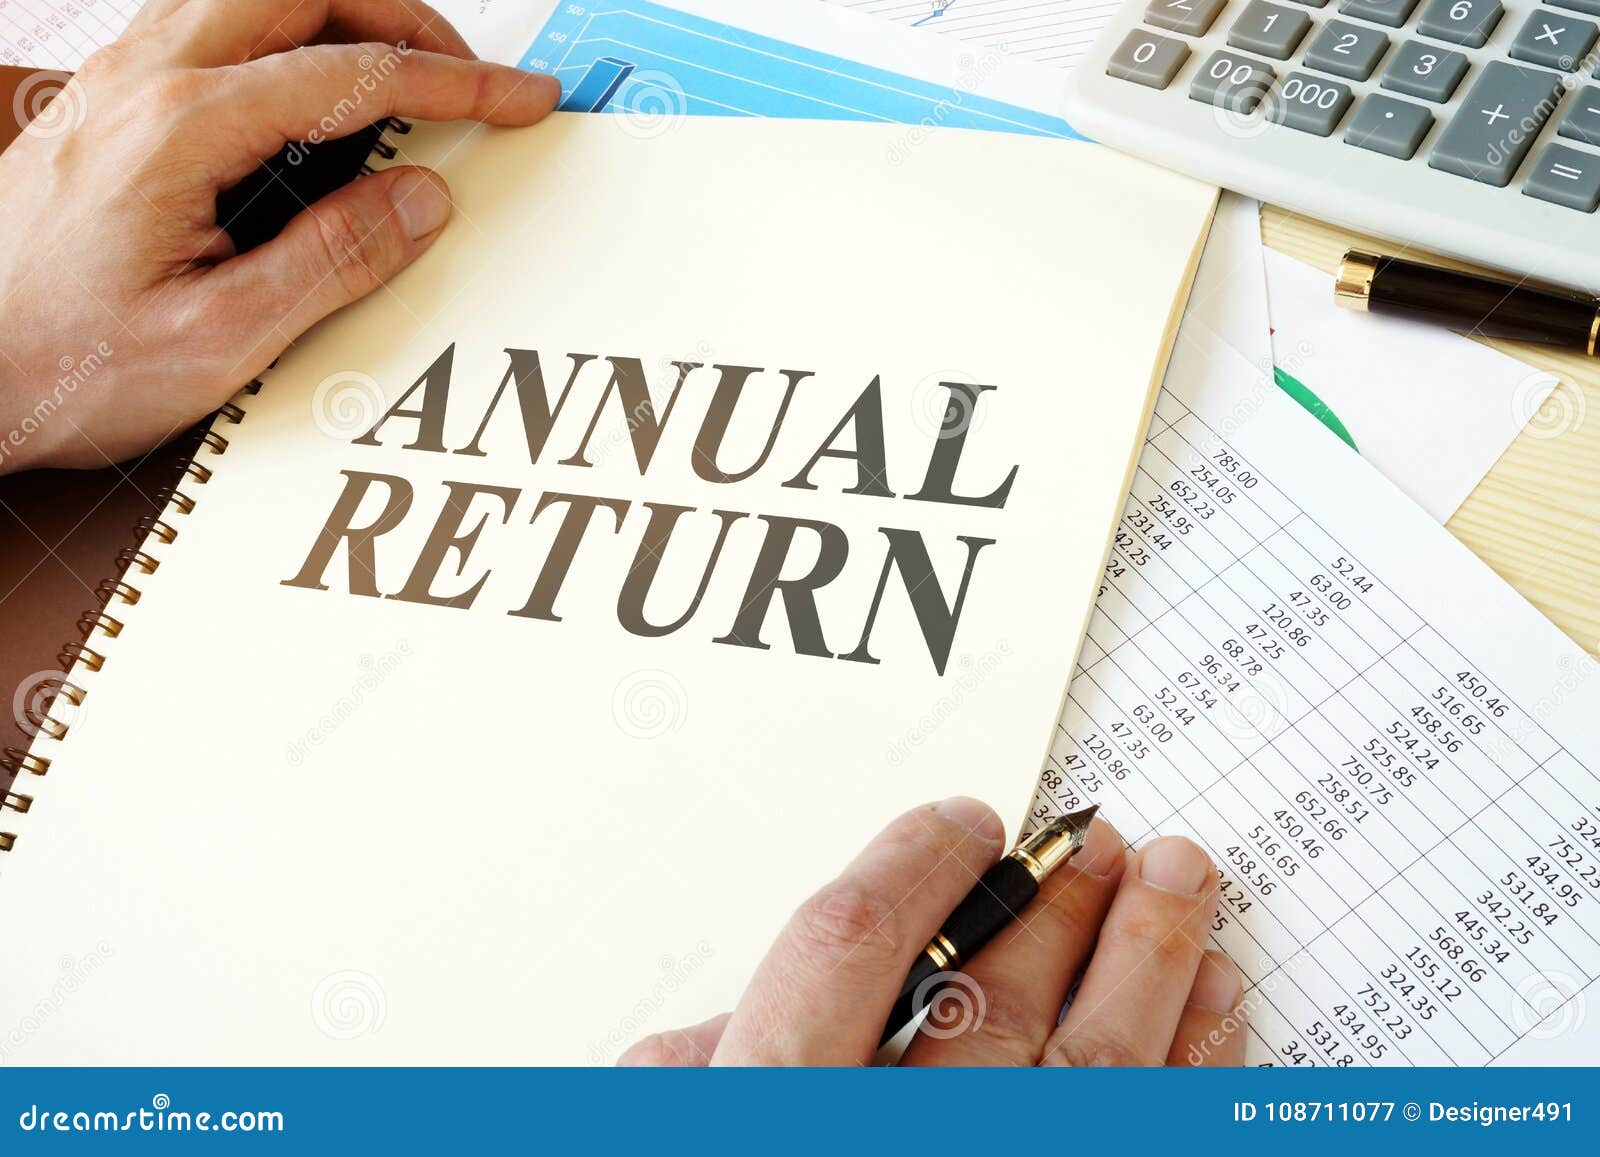 man holding document with annual return.